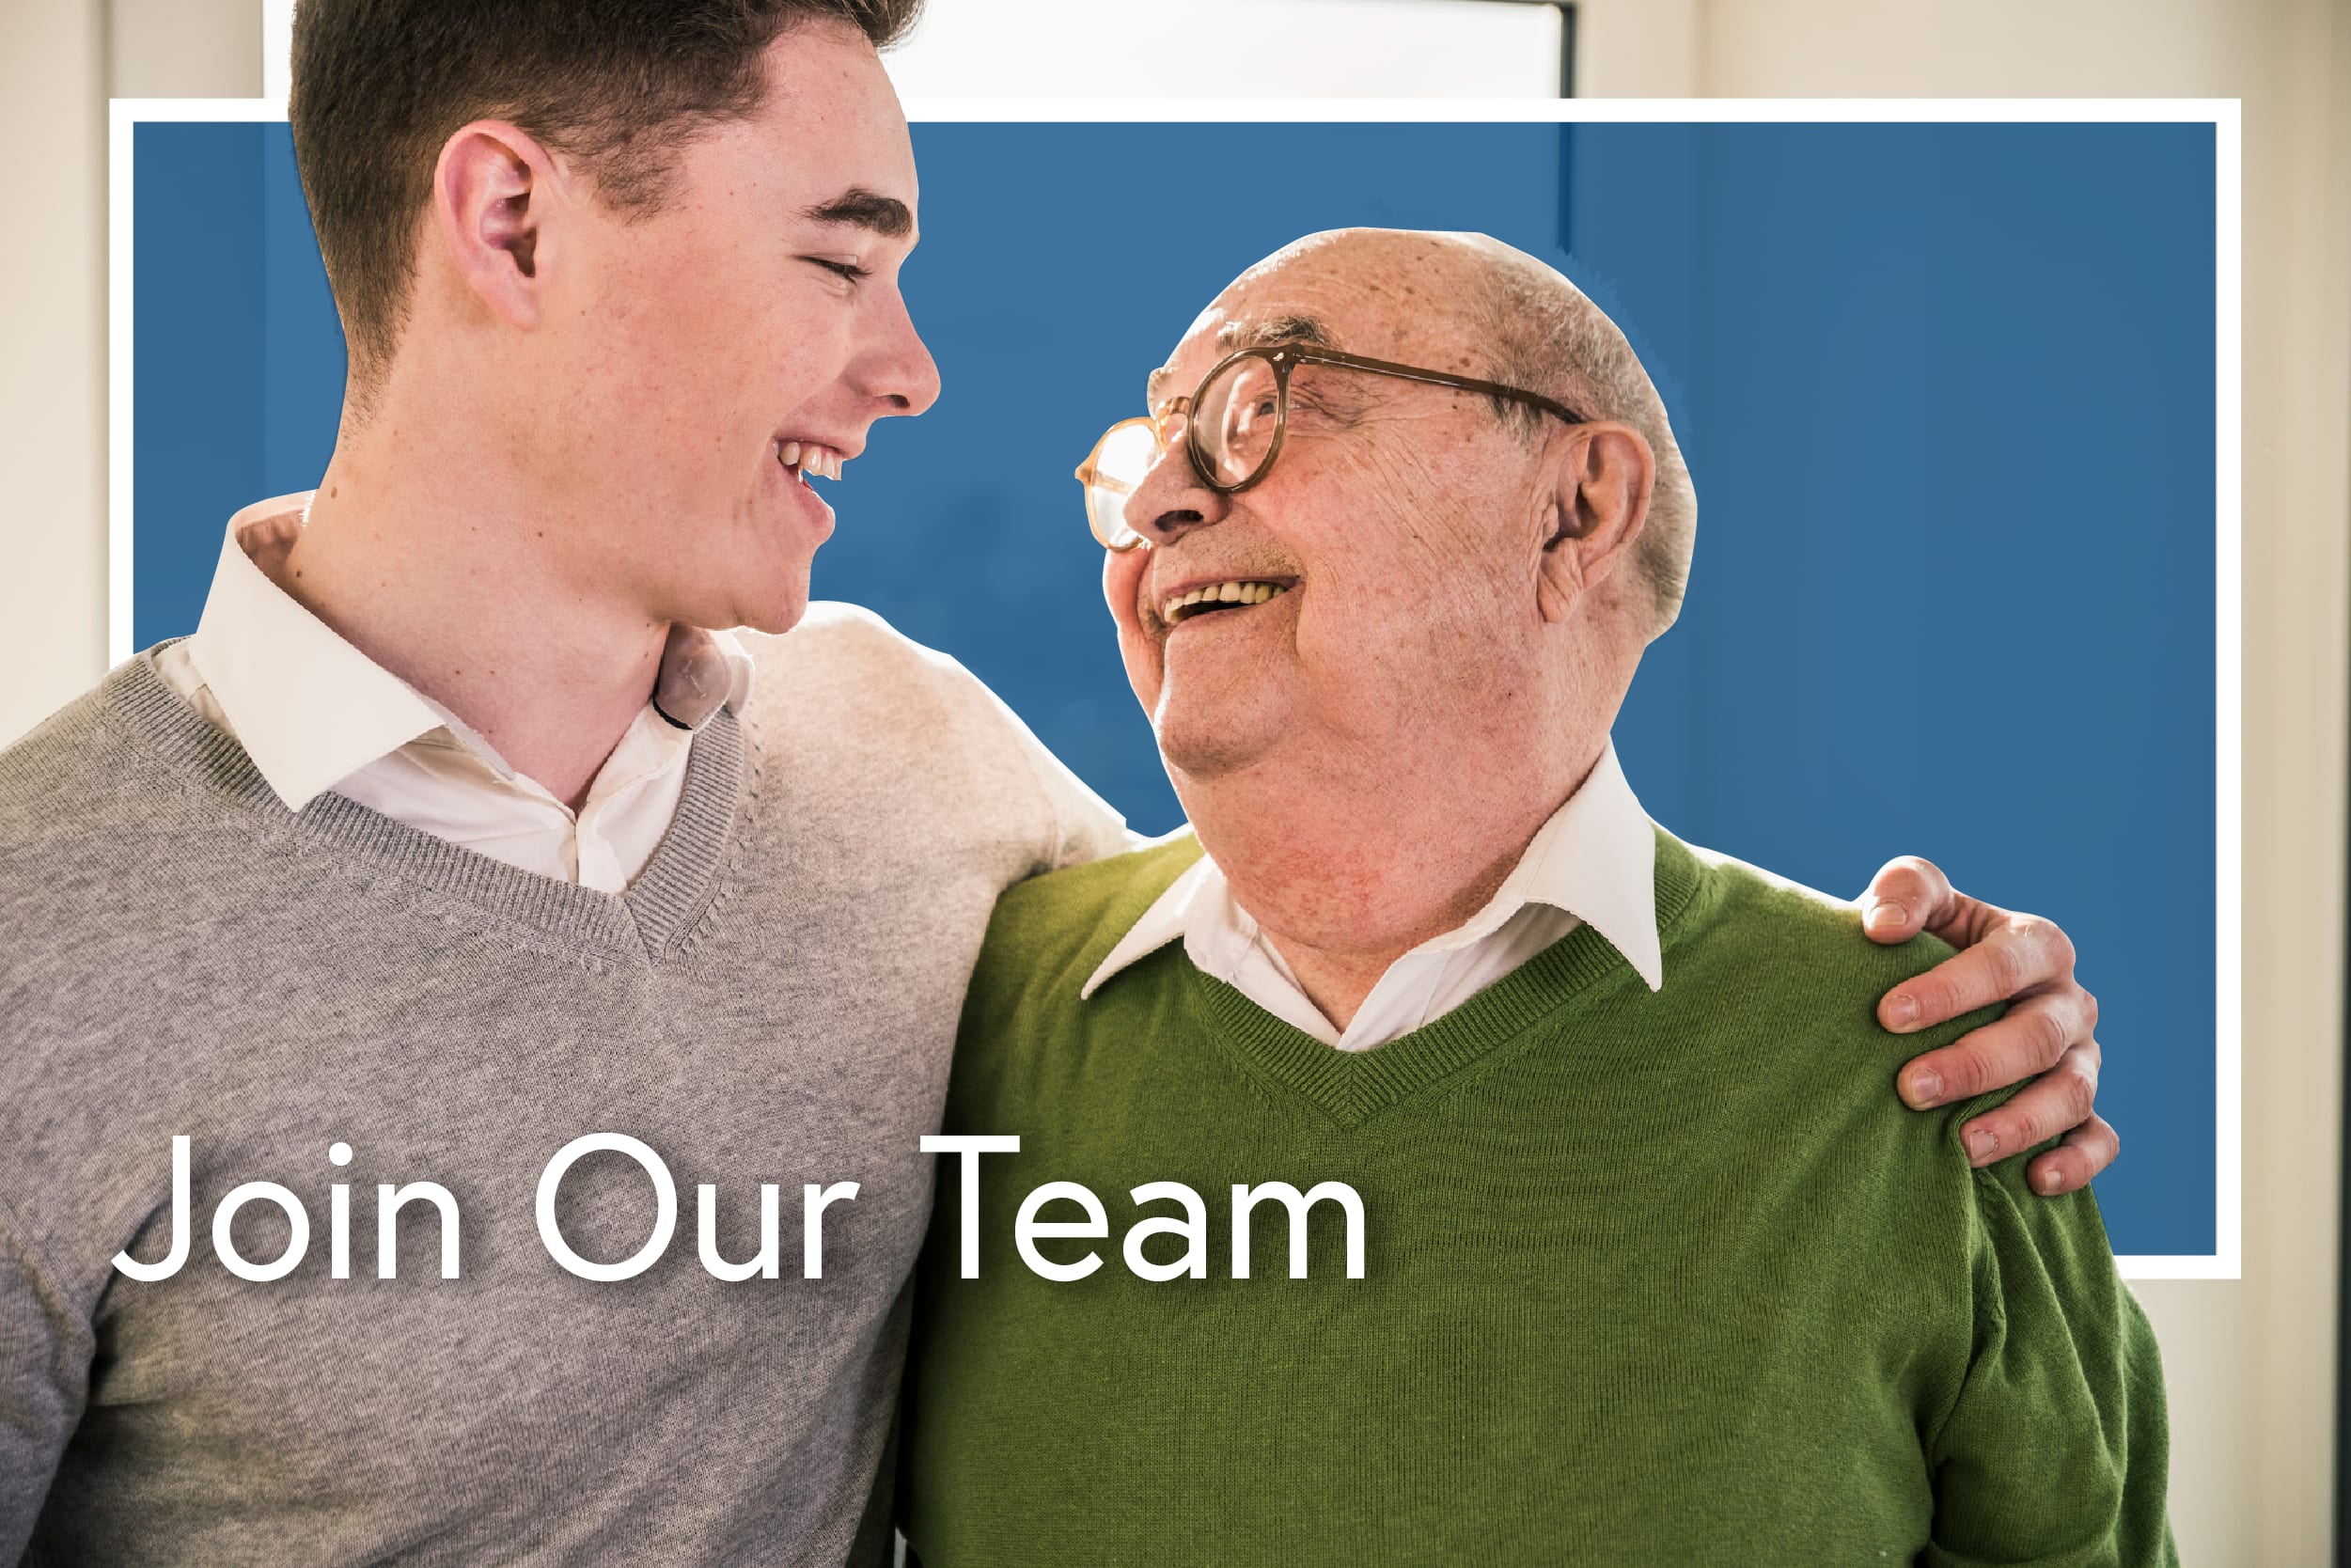 Join our team at Heritage Senior Living